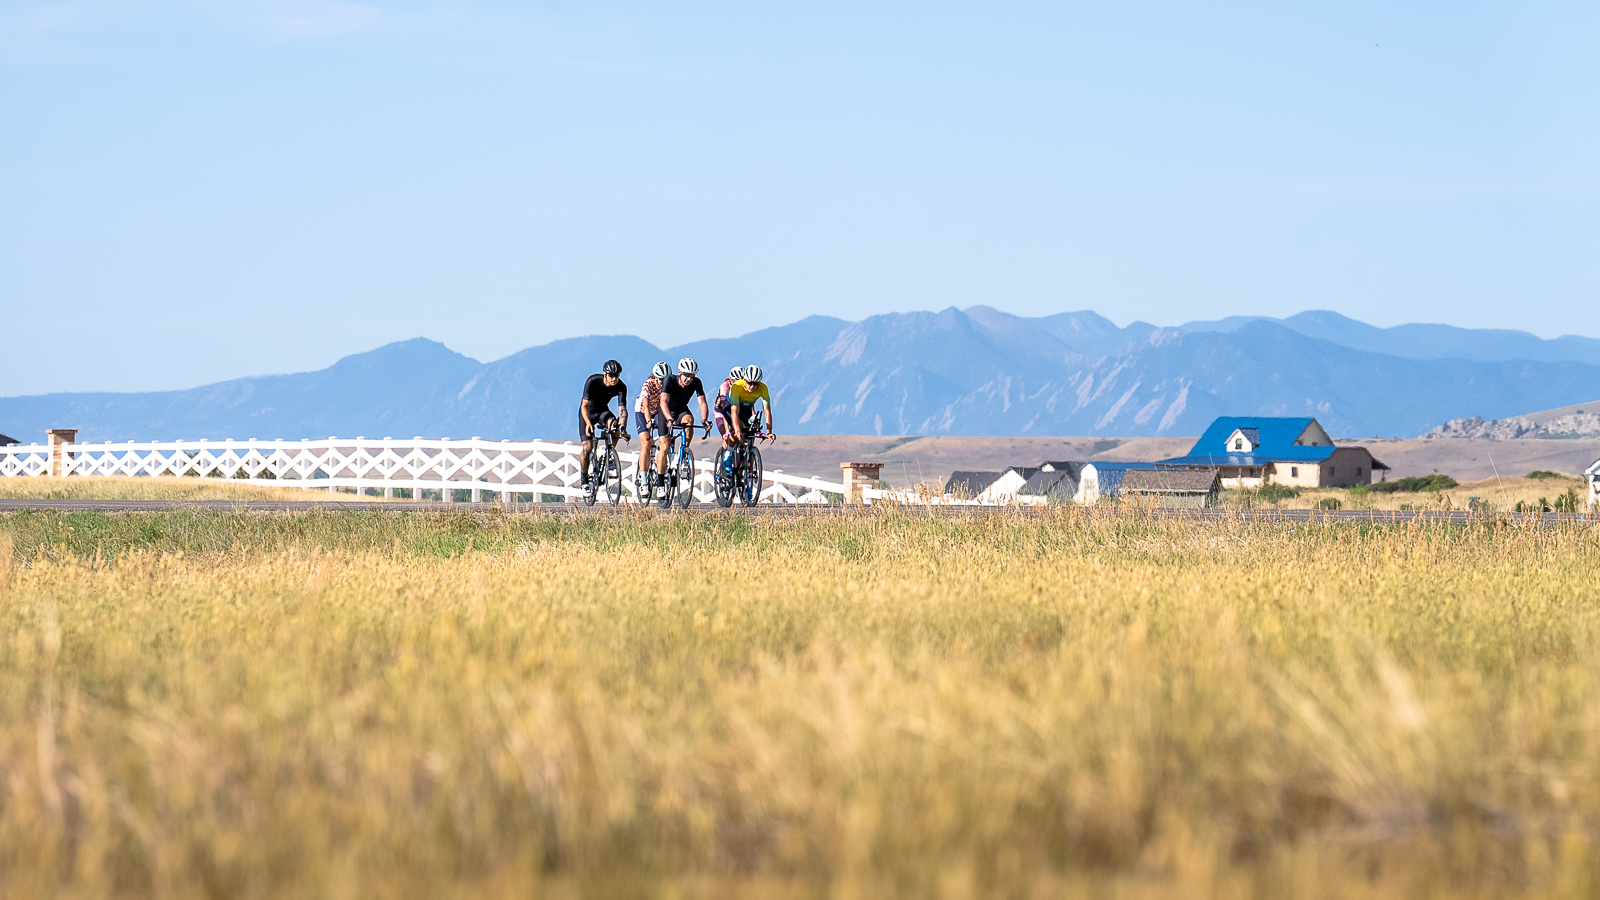 Group of cyclists ride with fence, farm, and mountains in the background